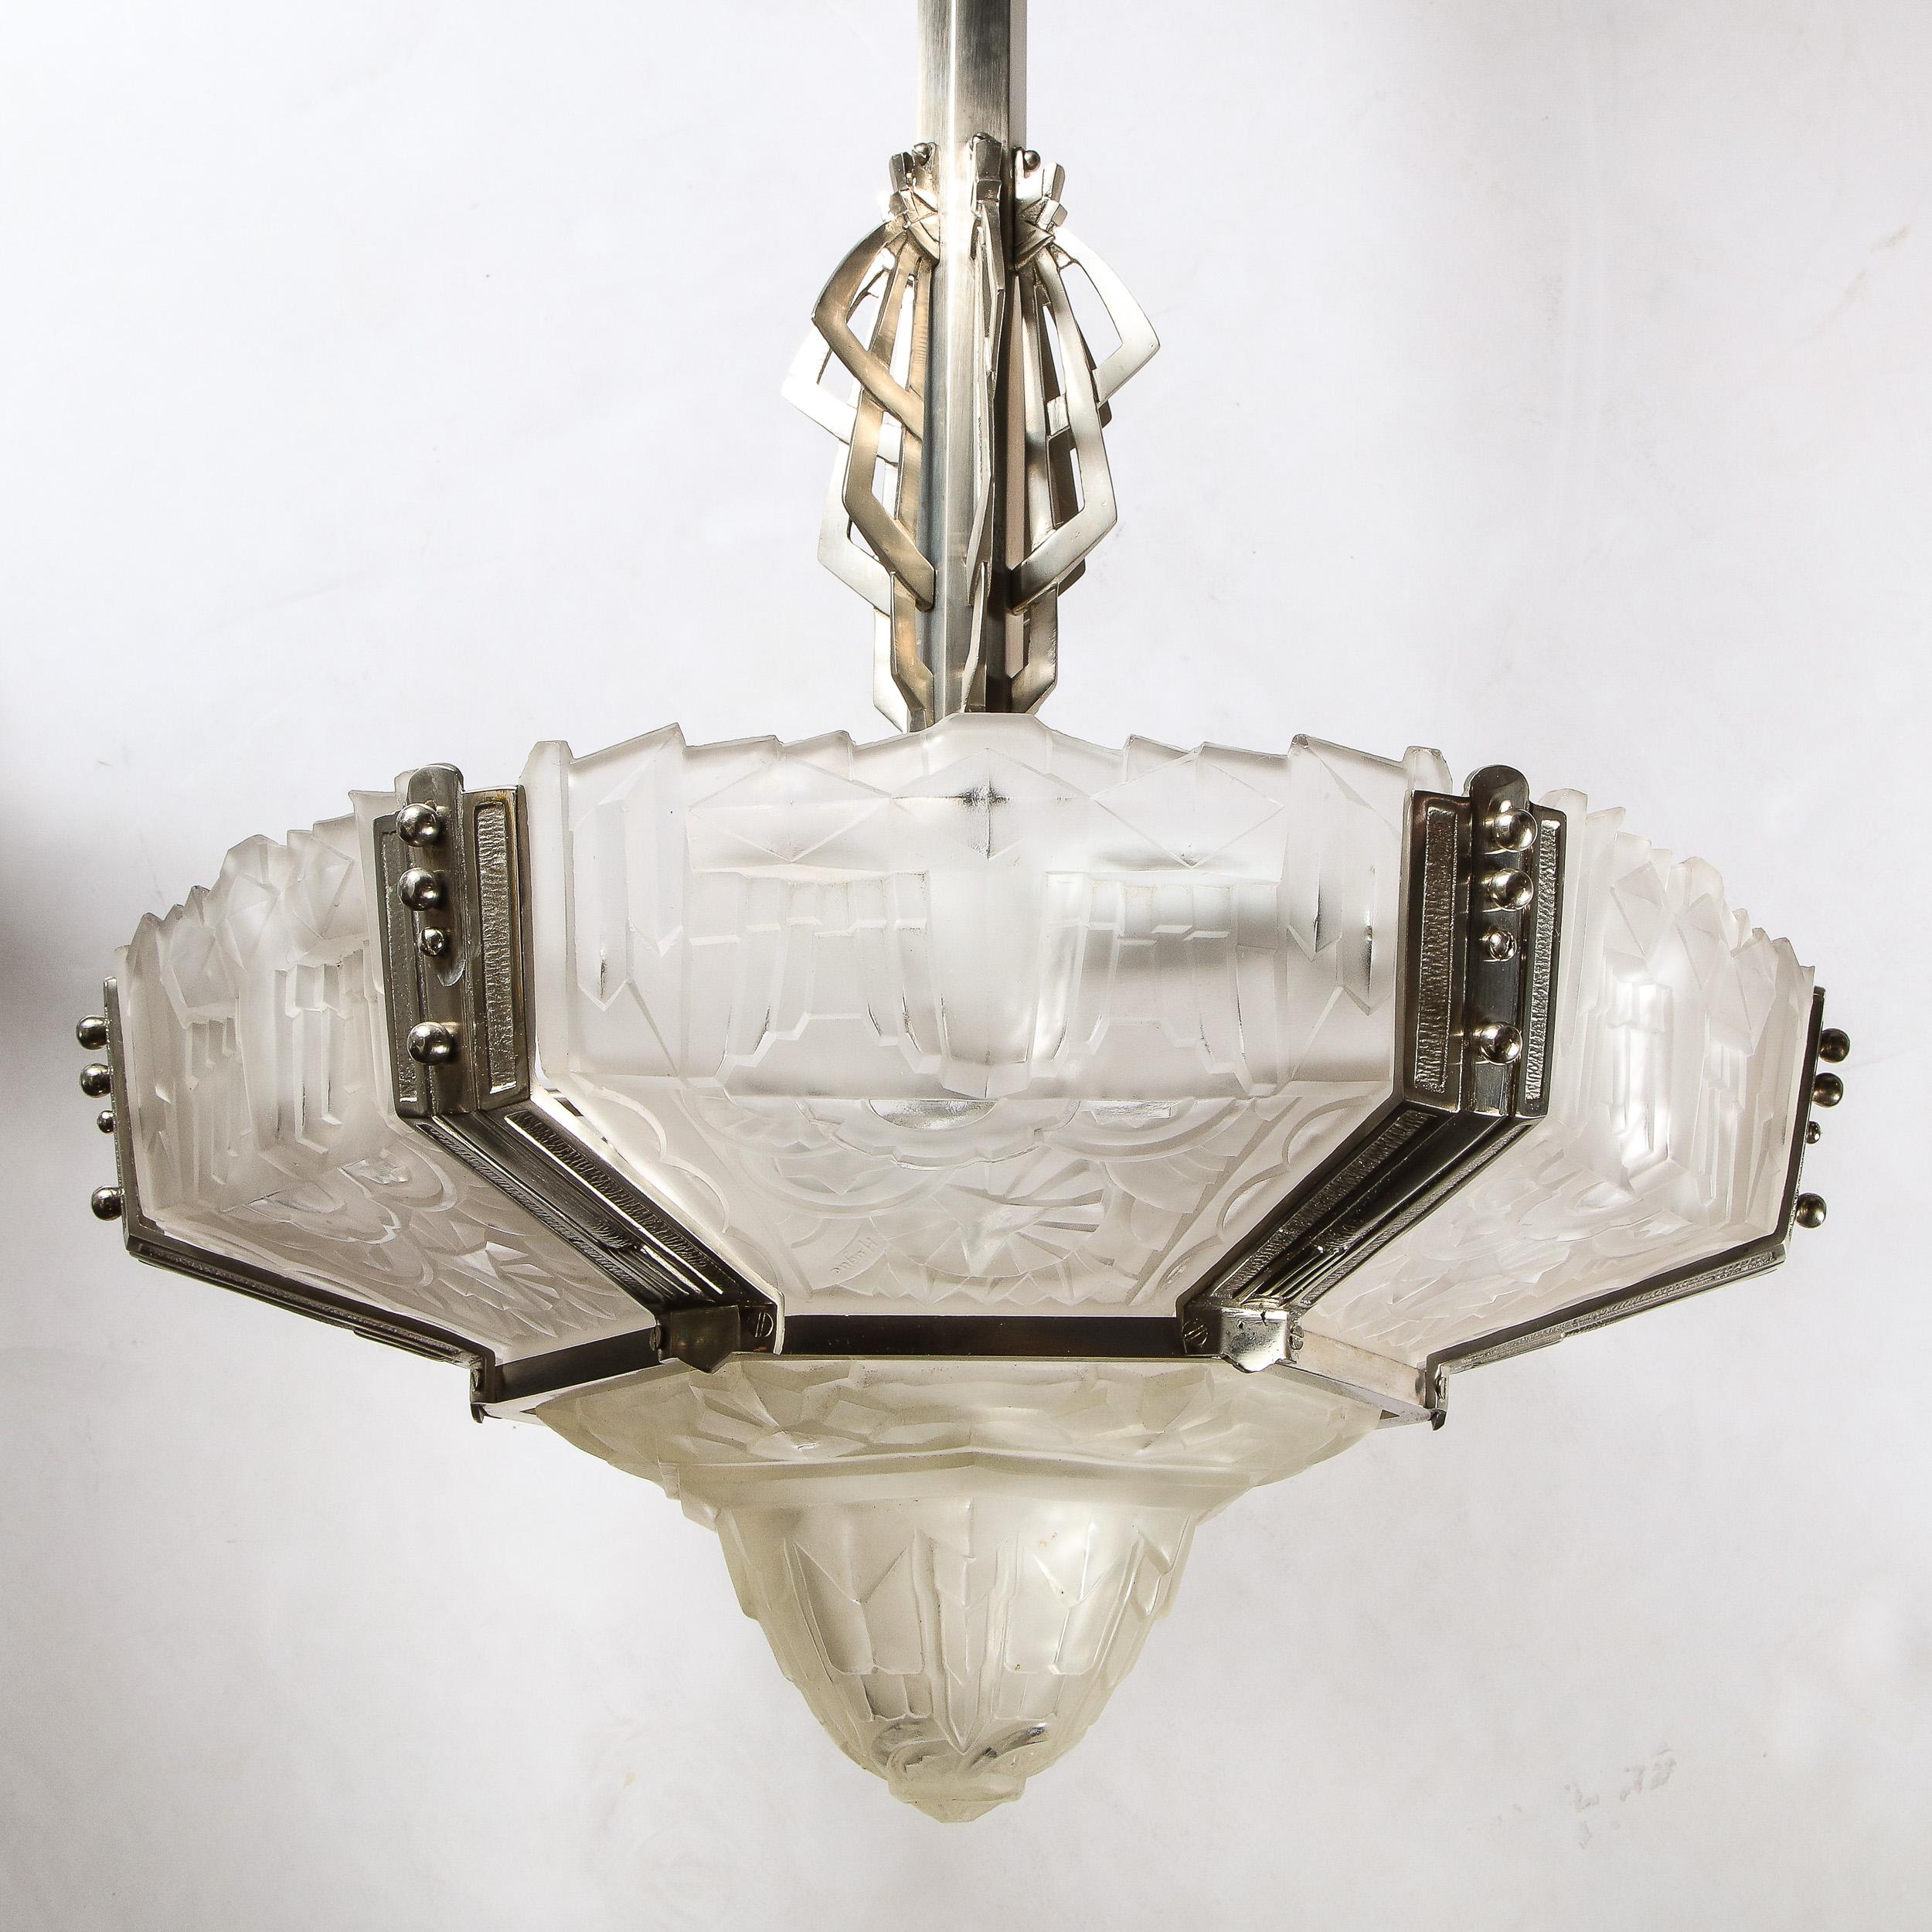 This rare and special Art Deco chandelier features six frosted relief glass panels with a center coupe all in a highly stylized Cubist geometric and floral motif ,all signed Hugue .The glass panels are fitted with a nickled bronze frame in a